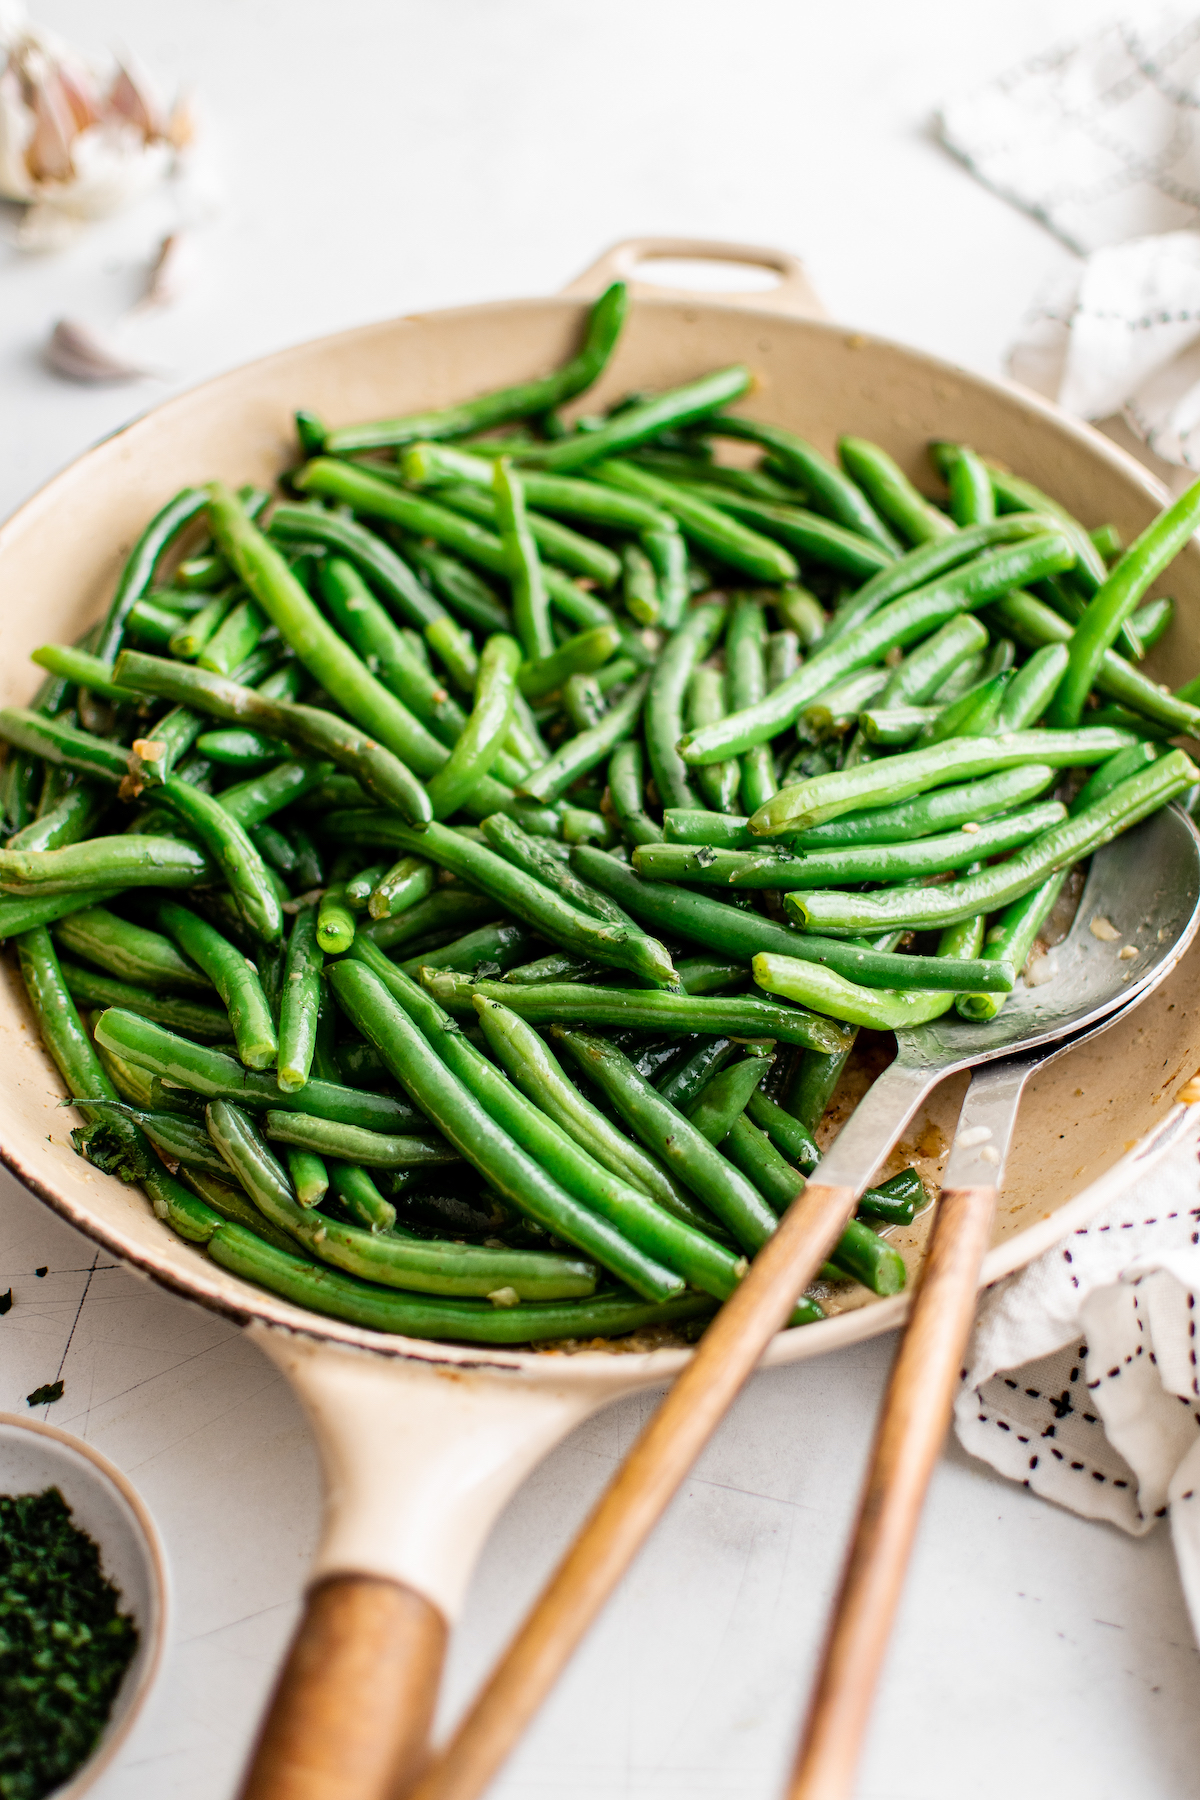 A ceramic skillet full of fresh, sauteed green beans.